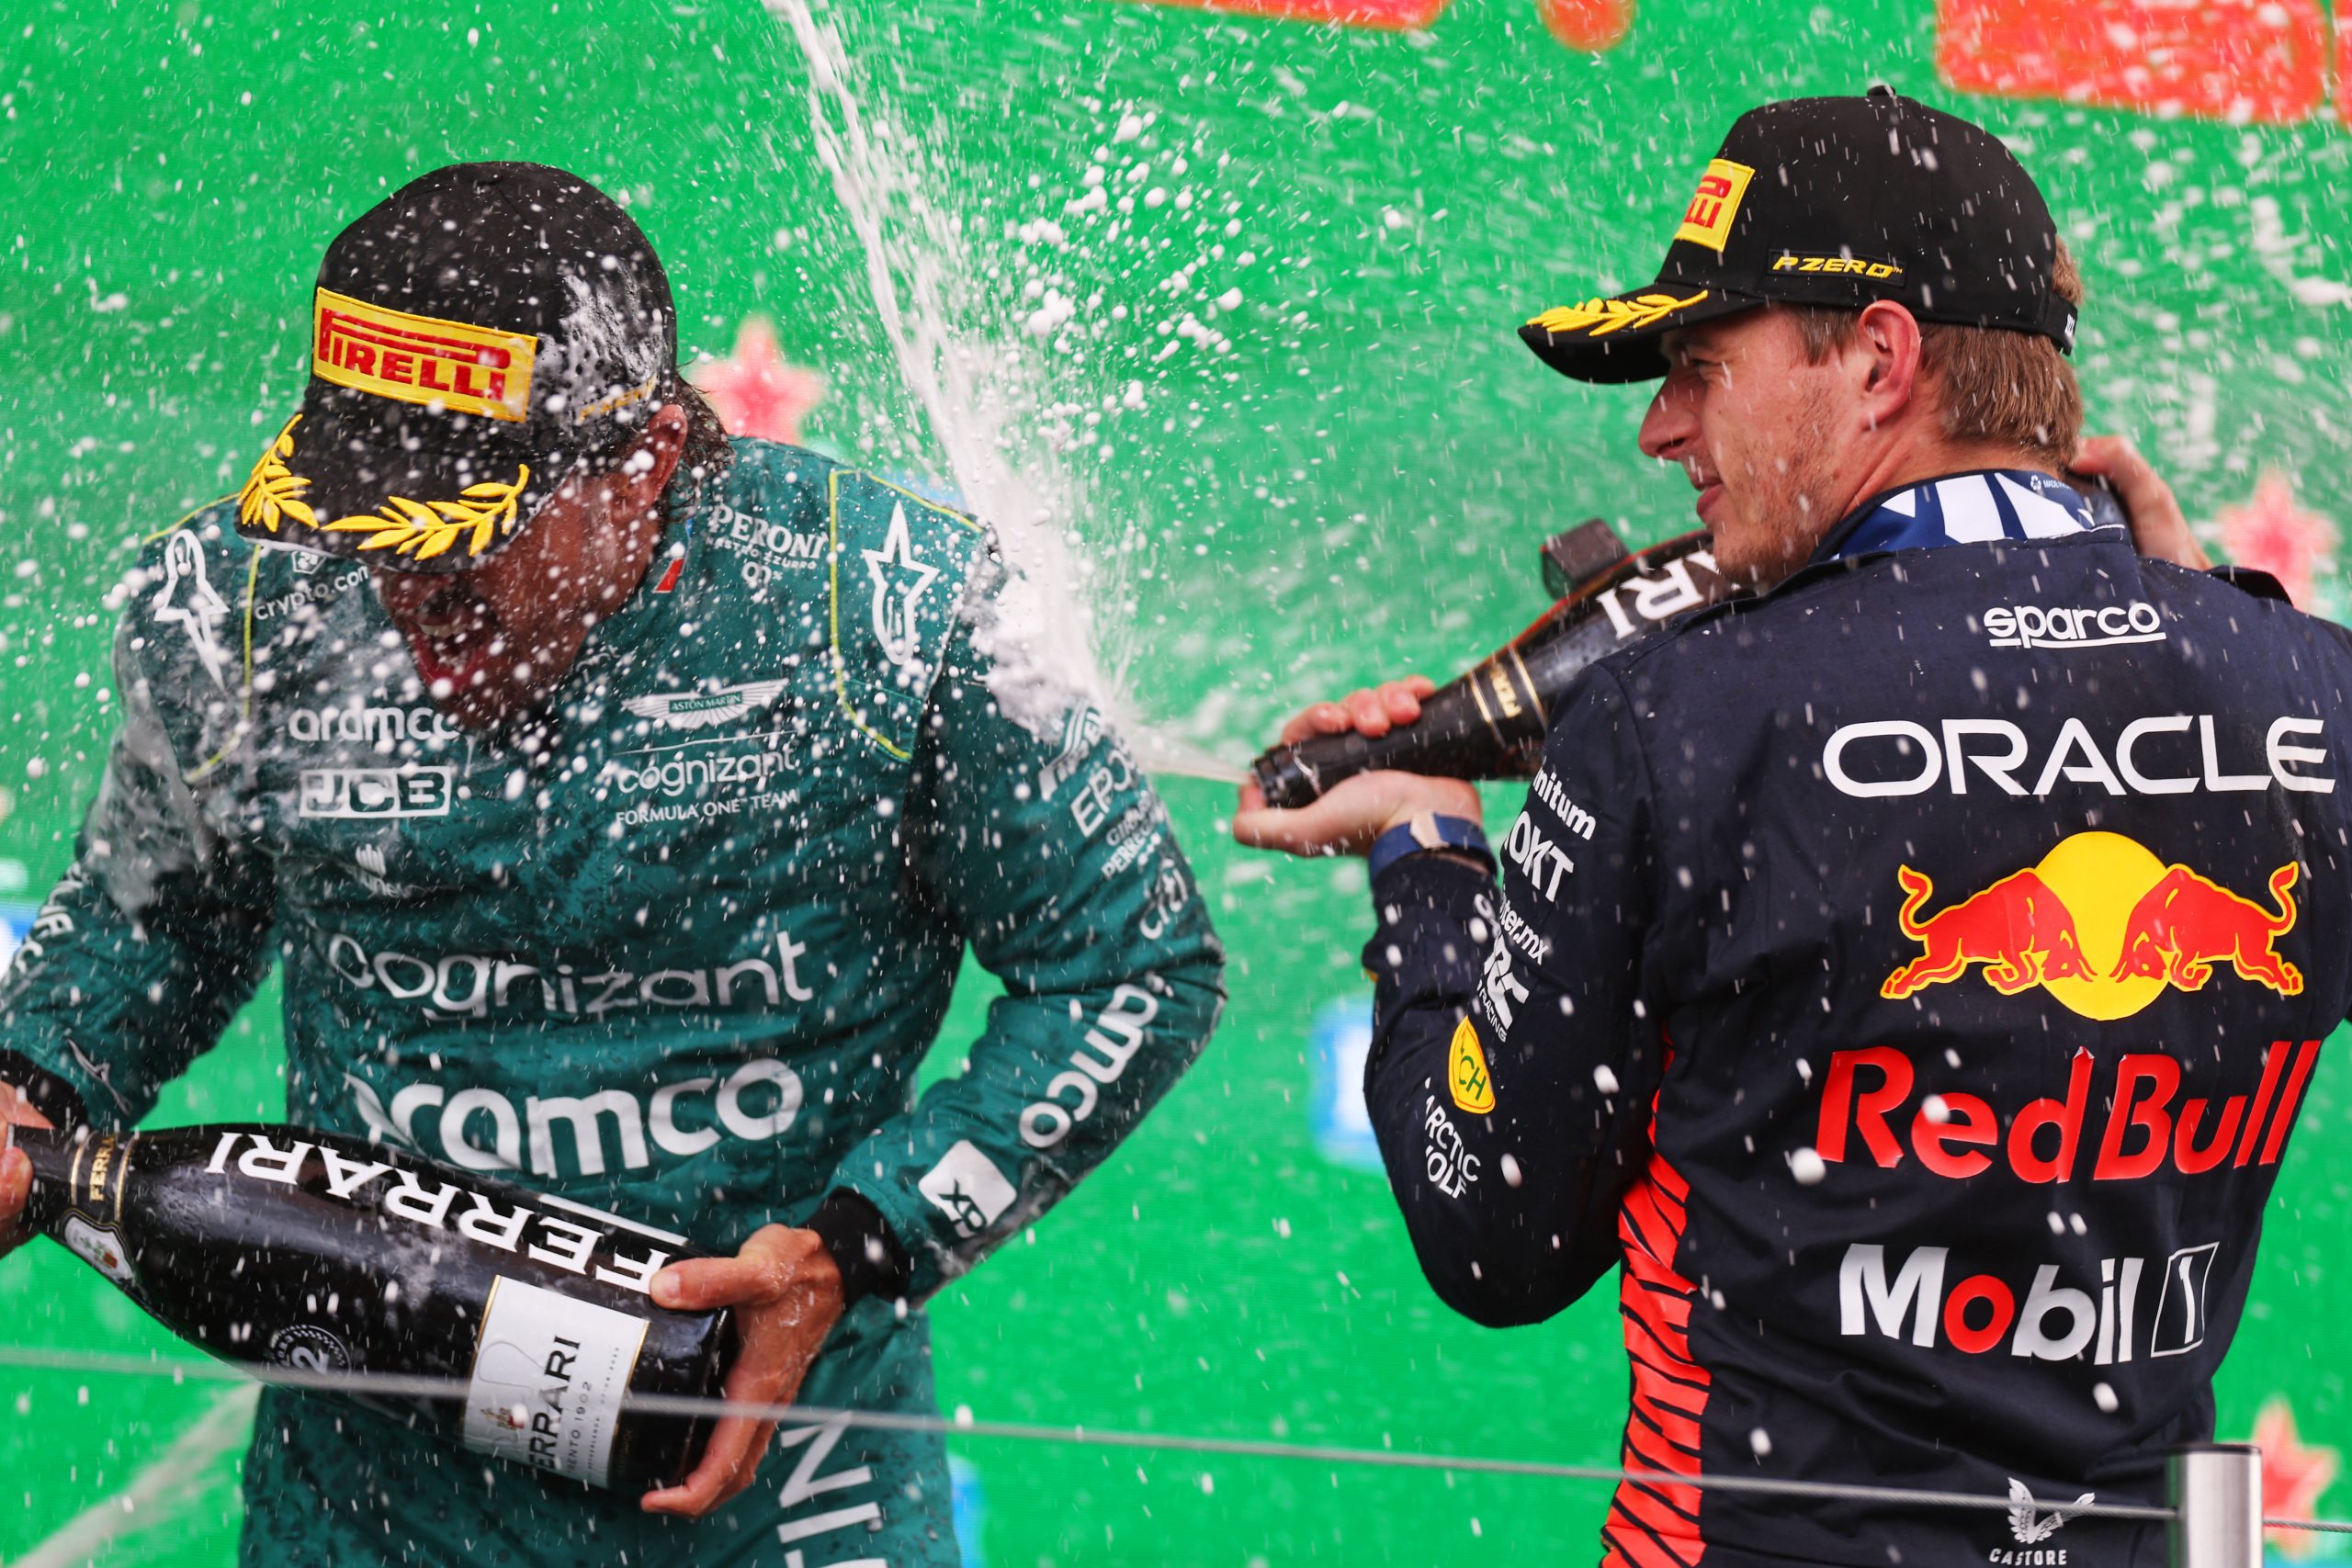 Max Verstappen (1) sprays champagne on Fernando Alonso following his win at the Circuit Zandvoort for the Dutch Grand Prix, his 11th win of the season and 9th in a row.